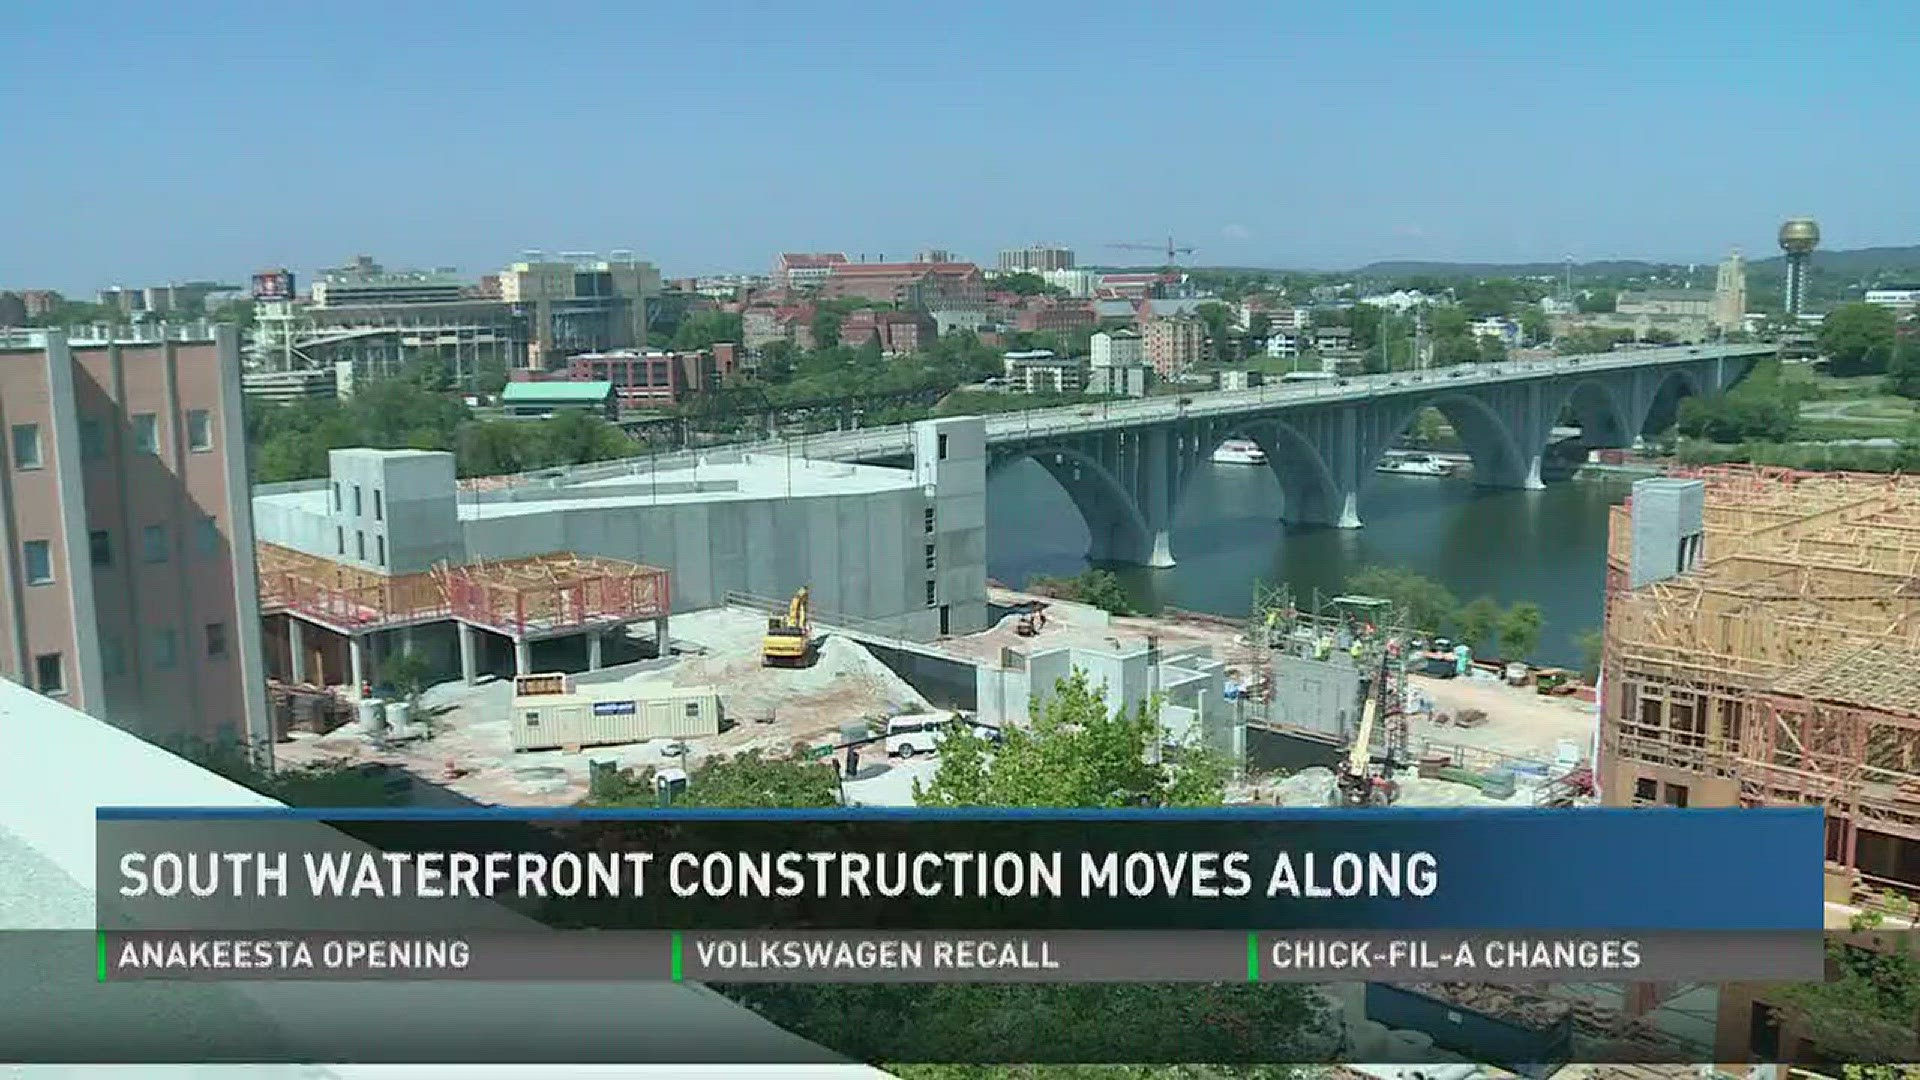 The city's South Waterfront construction project is well underway to bringing apartments, business buildings and a Riverwalk to the area.